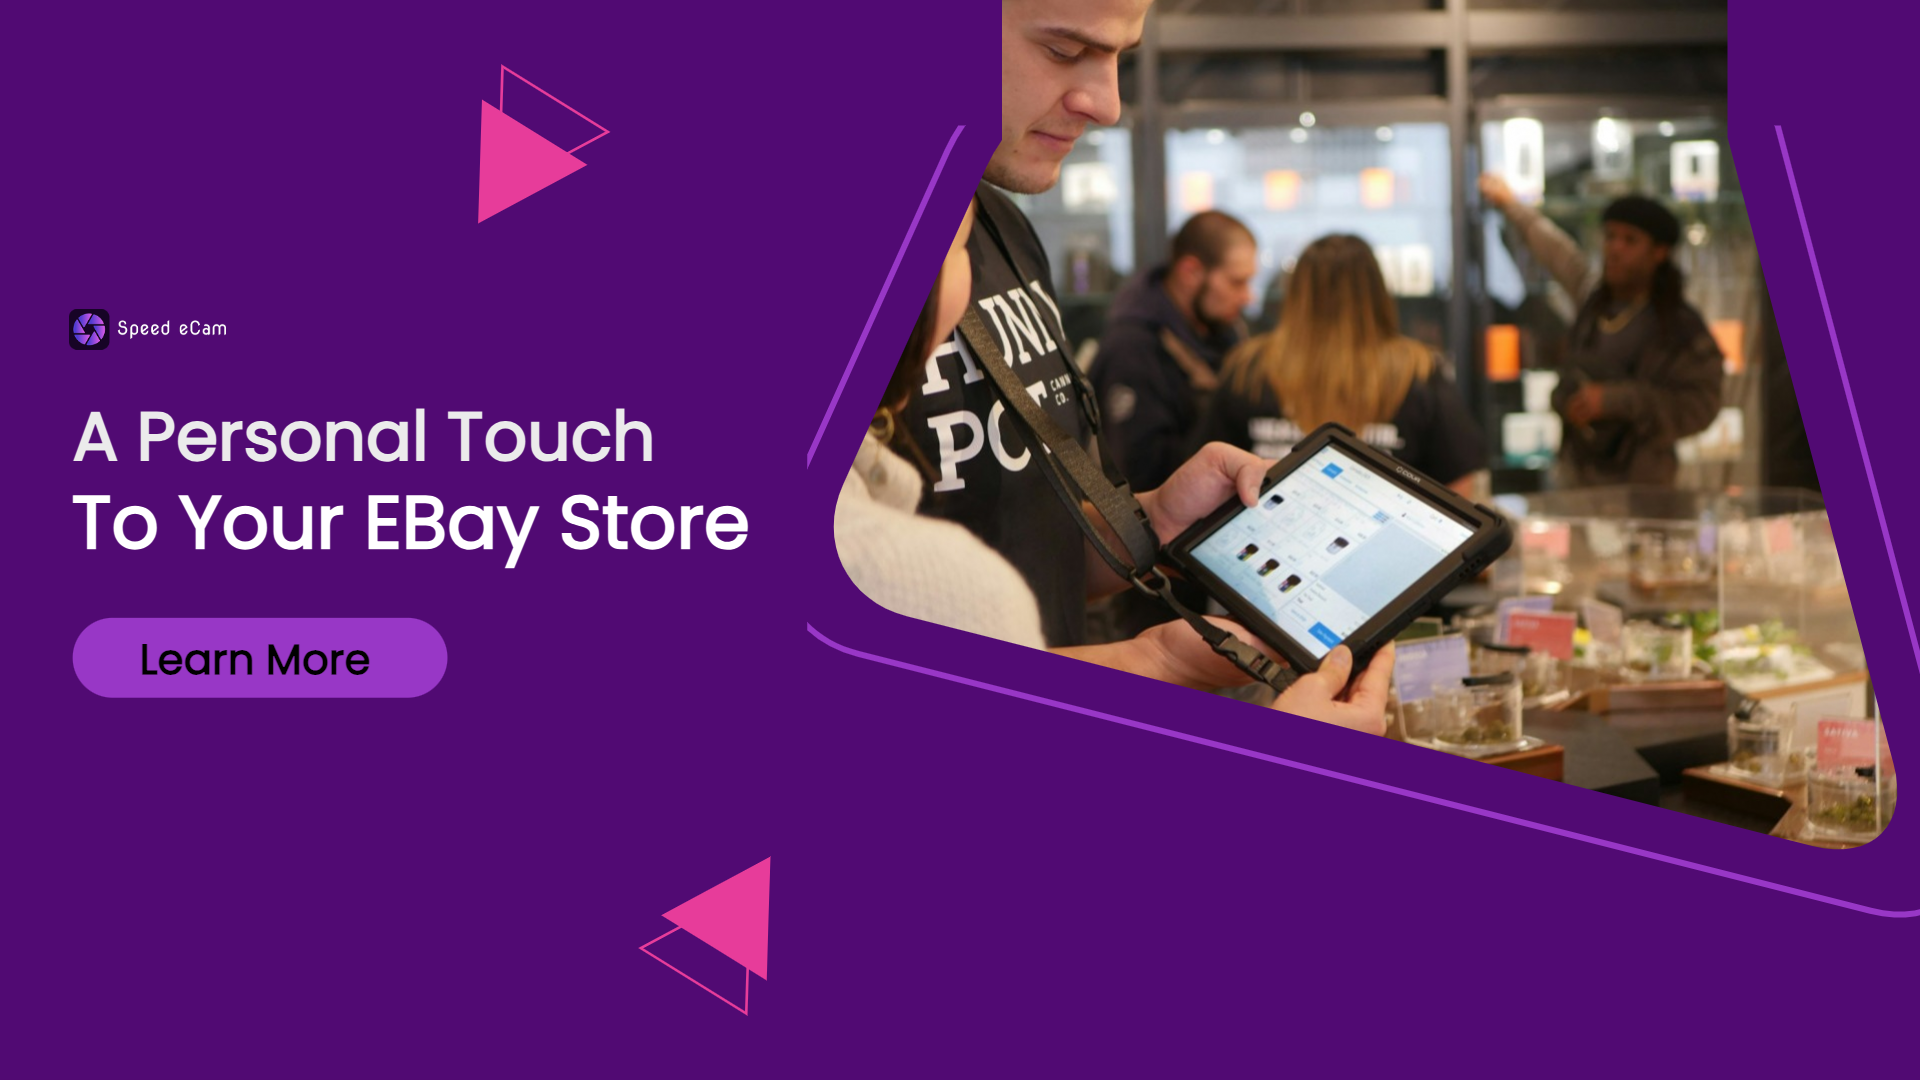 How to Add a Personal Touch to Your eBay Store